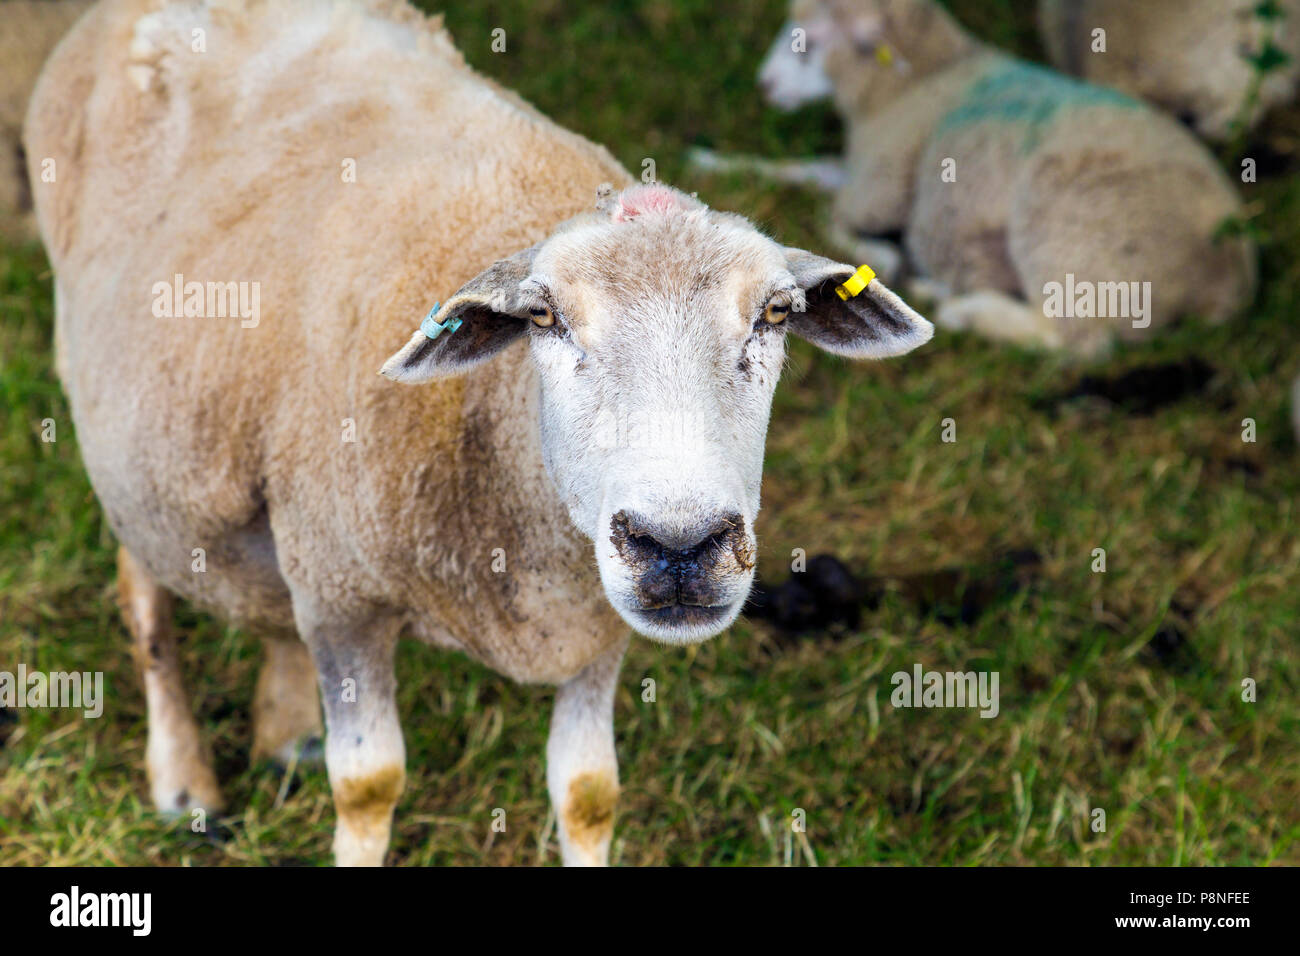 Funny portrait of a sheep looking sheepish Stock Photo